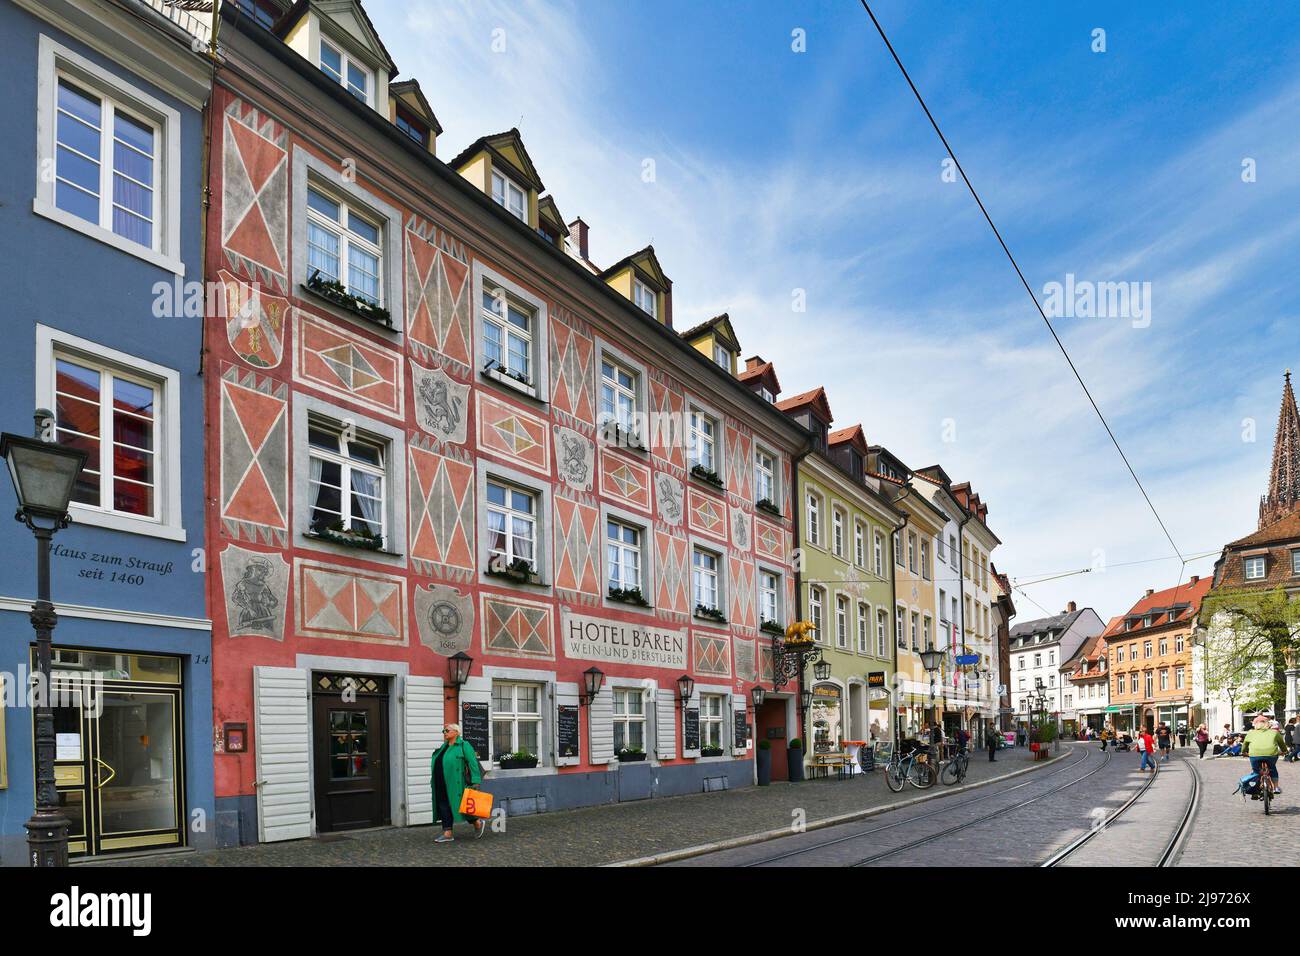 Freiburg, Germany - April 2022: City center with historic hotel building called 'Hotel Bären' Stock Photo